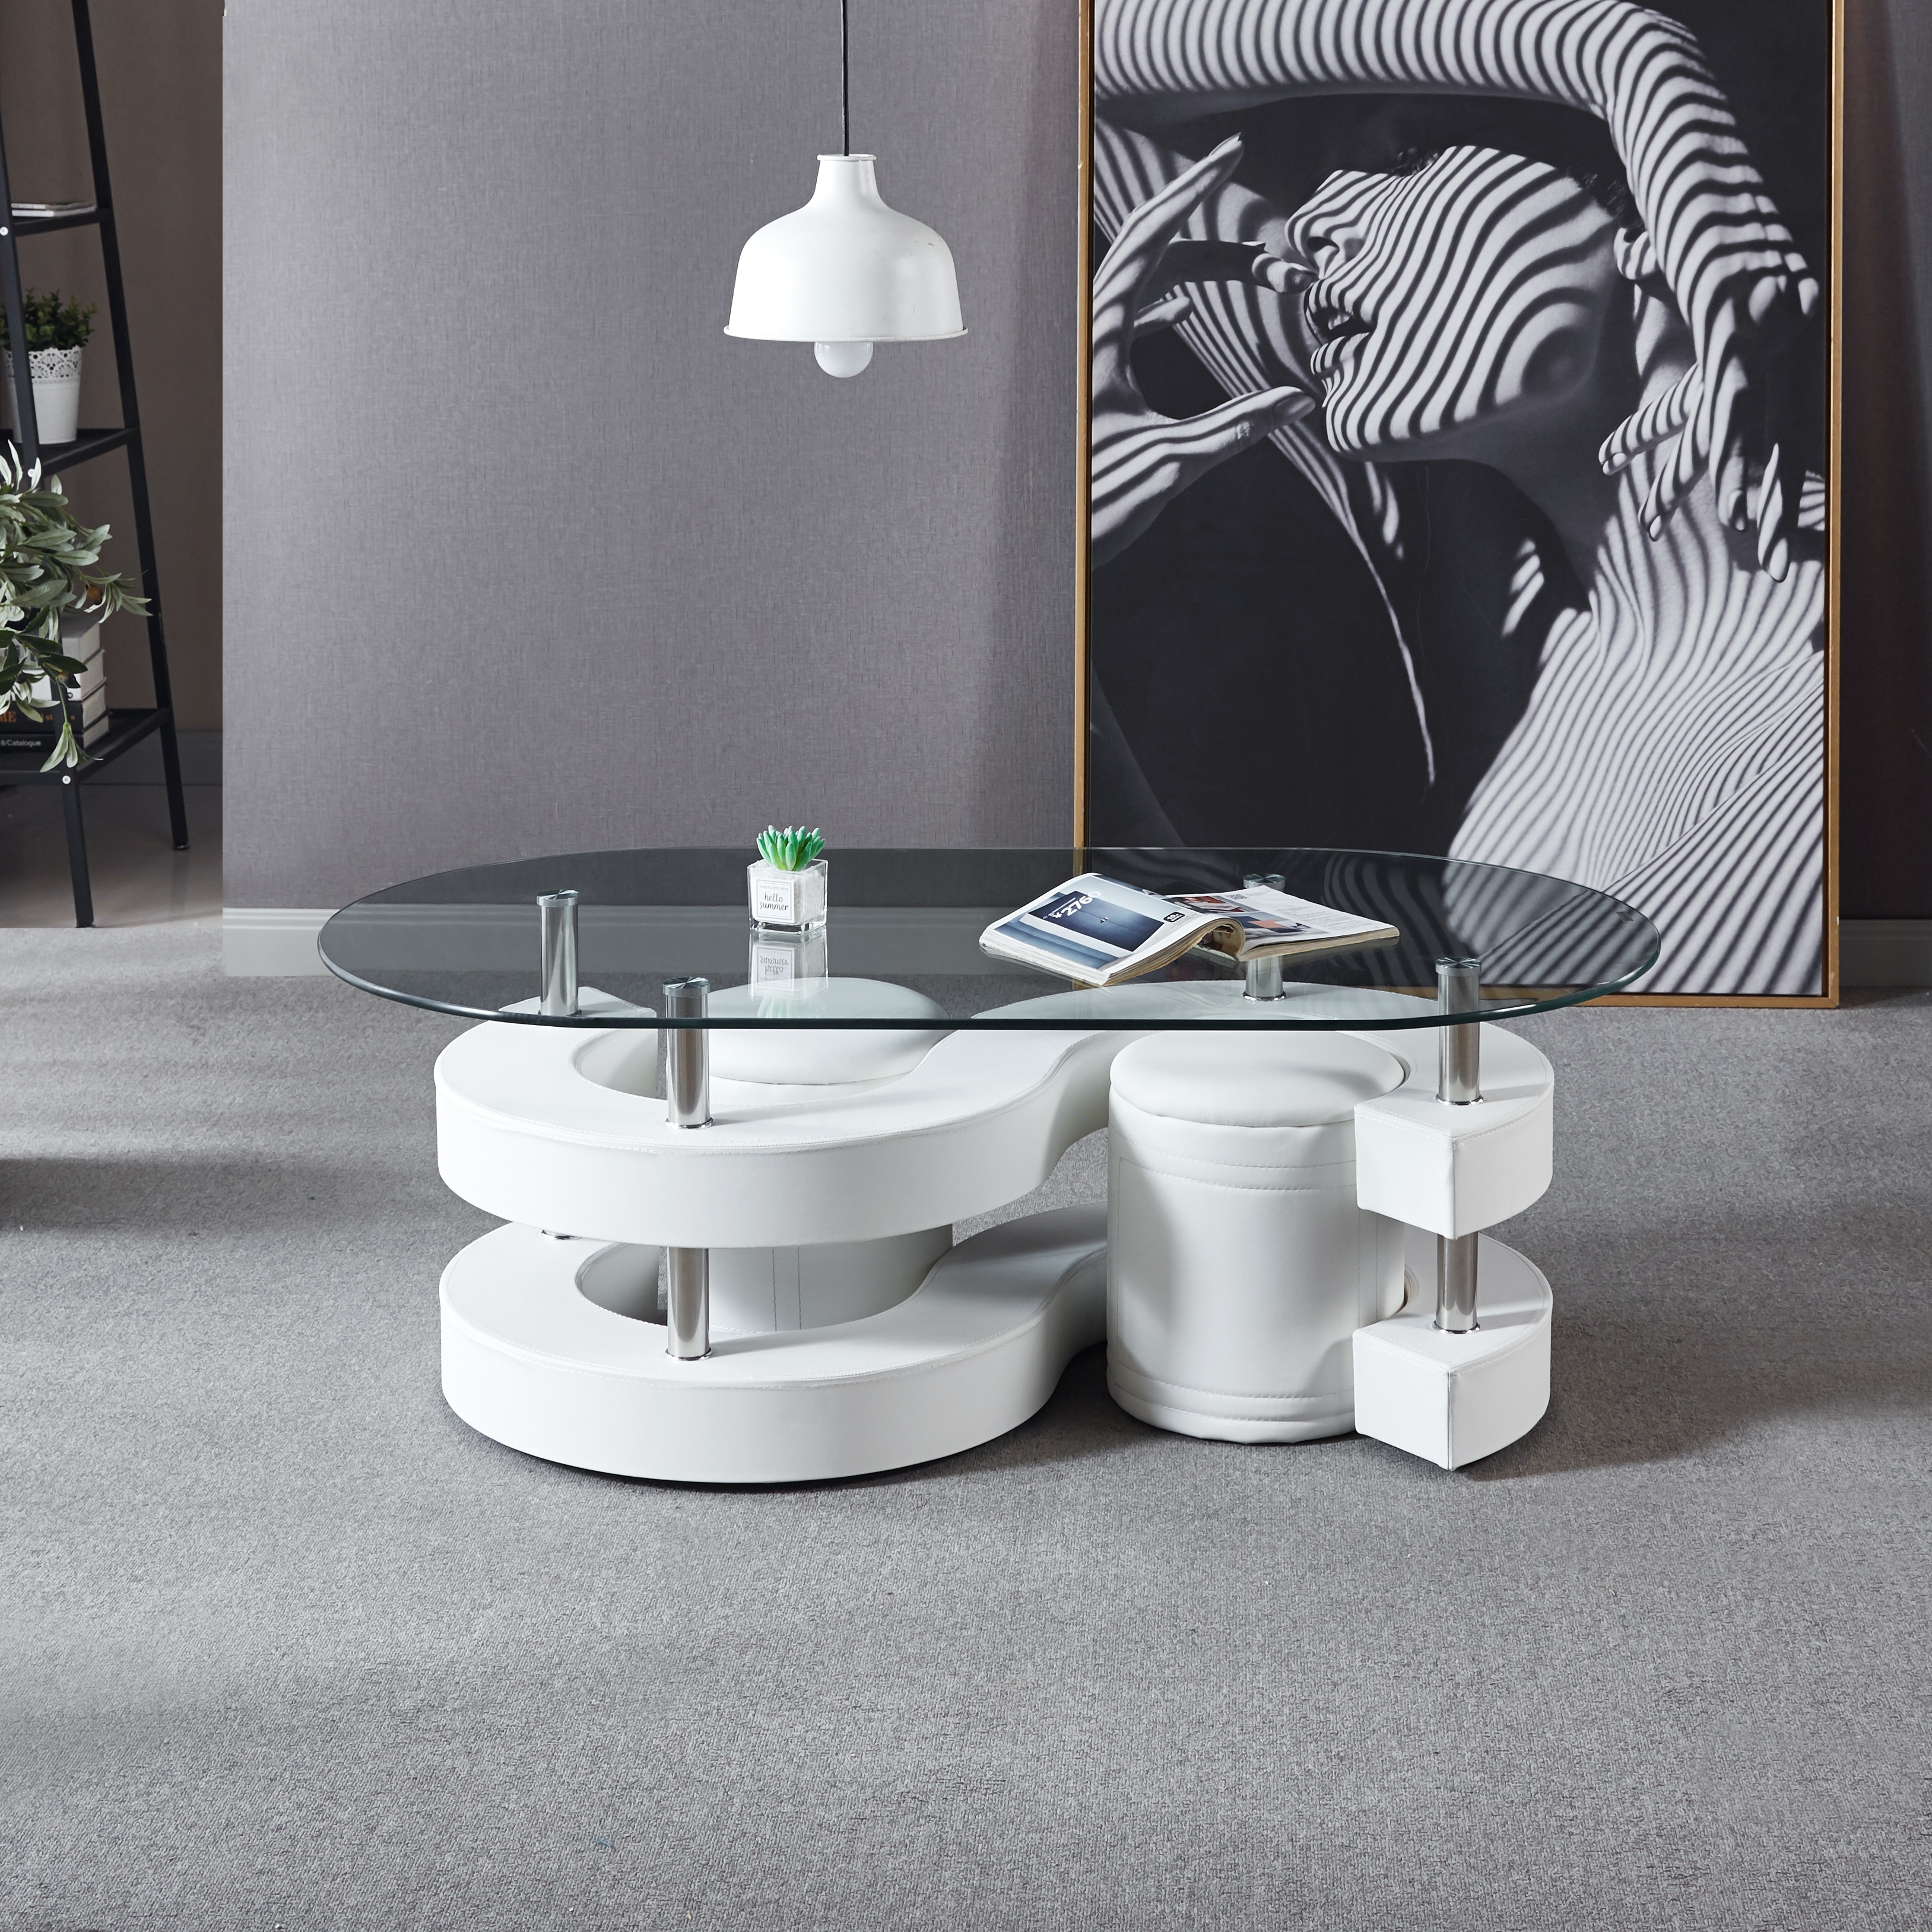 3 Pieces Coffee Table Set, Oval 10mm/0.39 inch Thick Tempered Glass Table and 2 Leather Stools